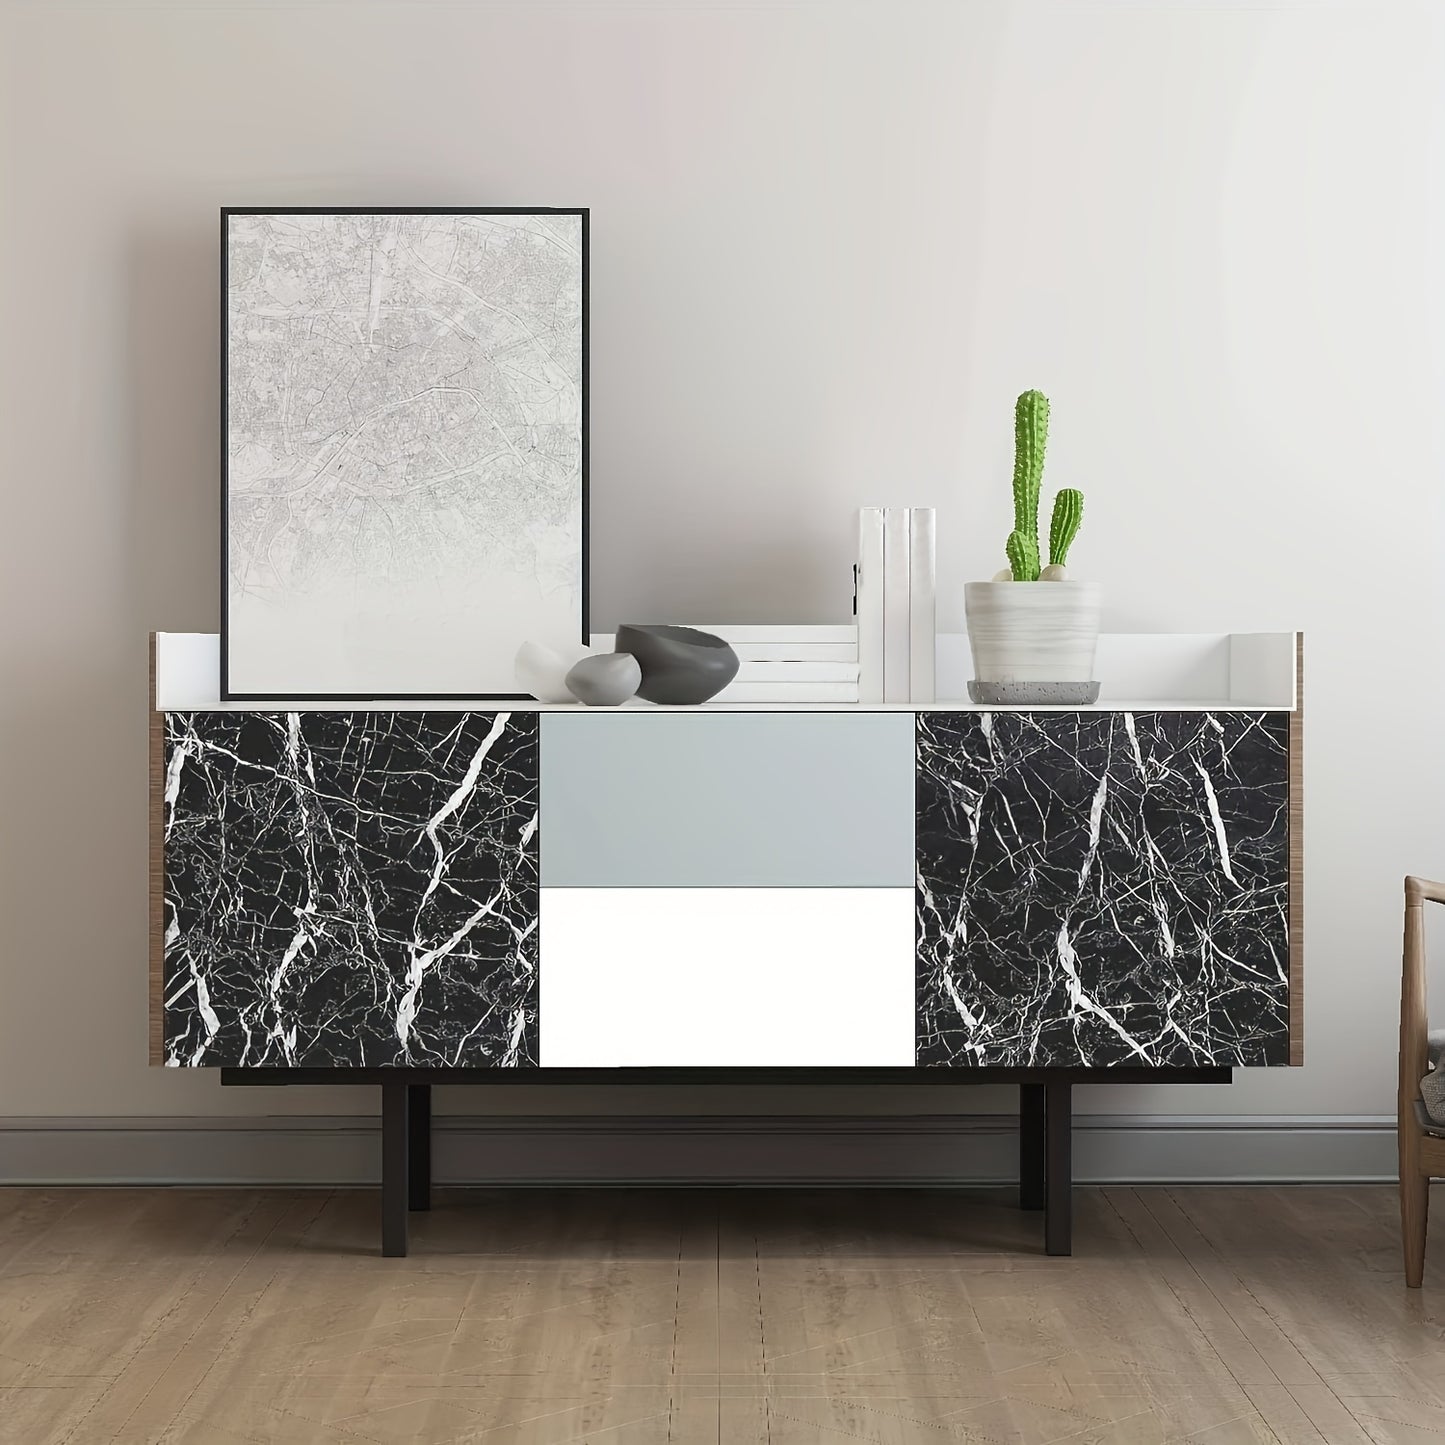 1 Roll Marble Wallpaper - PVC Household Wallpaper | Waterproof, High Temperature-Resistant & Oil-Resistant | Self-Adhesive Contact Paper for Bathroom Counters & Kitchen Cabinets Decor